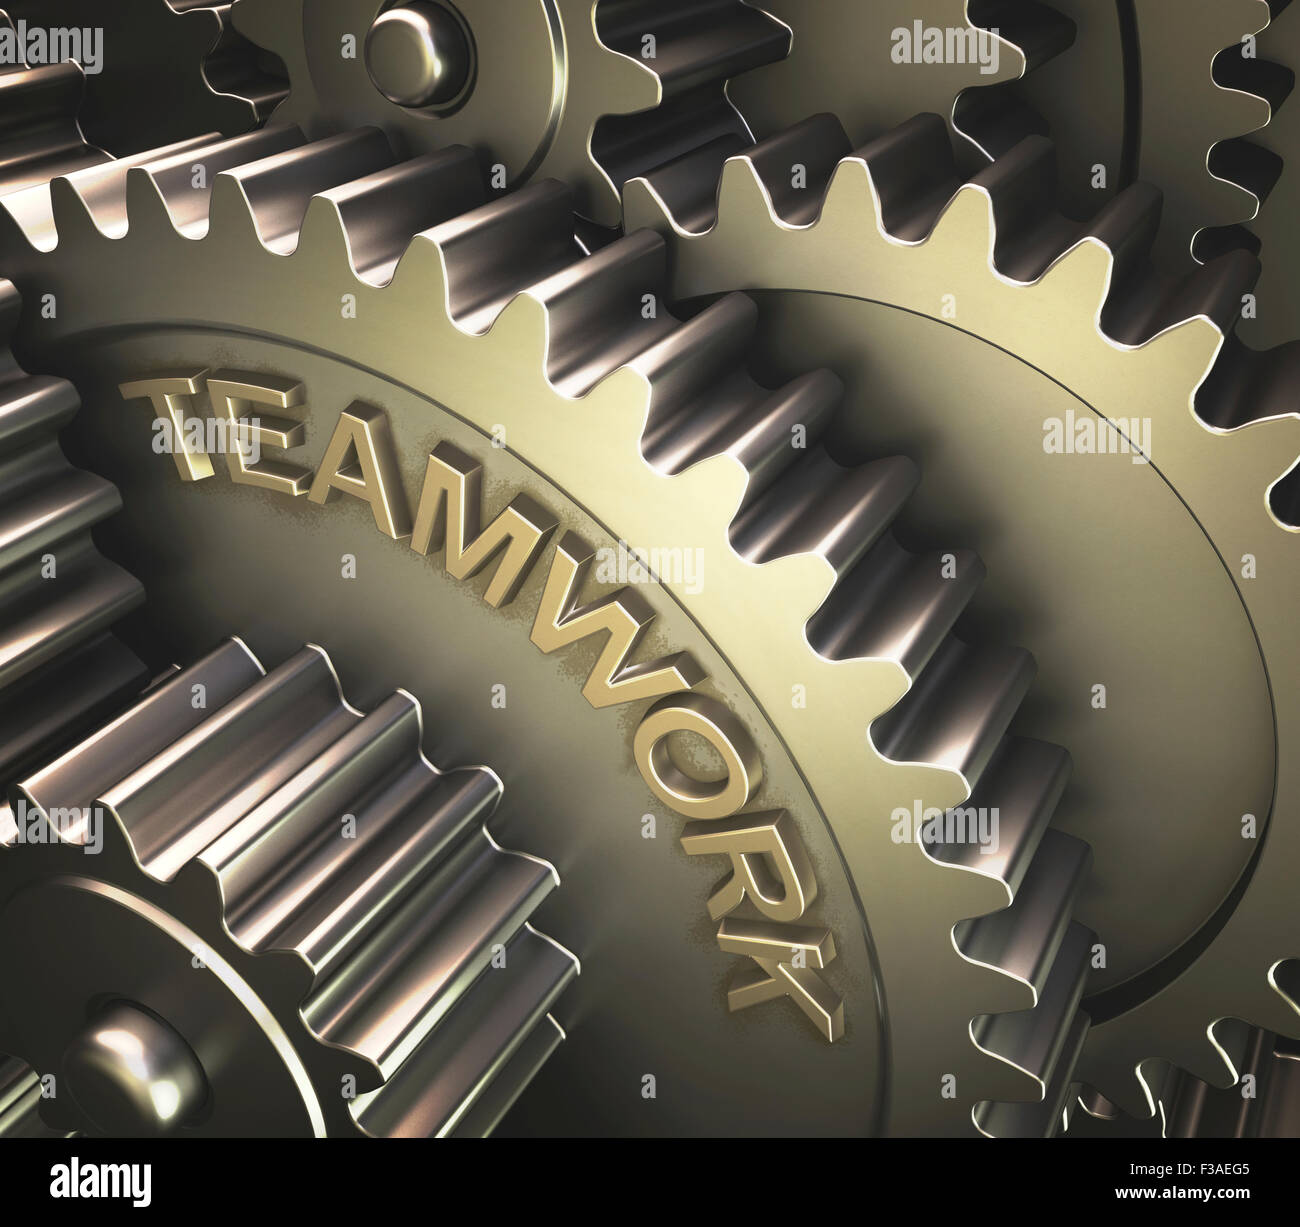 Gears with the word 'teamwork', computer illustration. Stock Photo